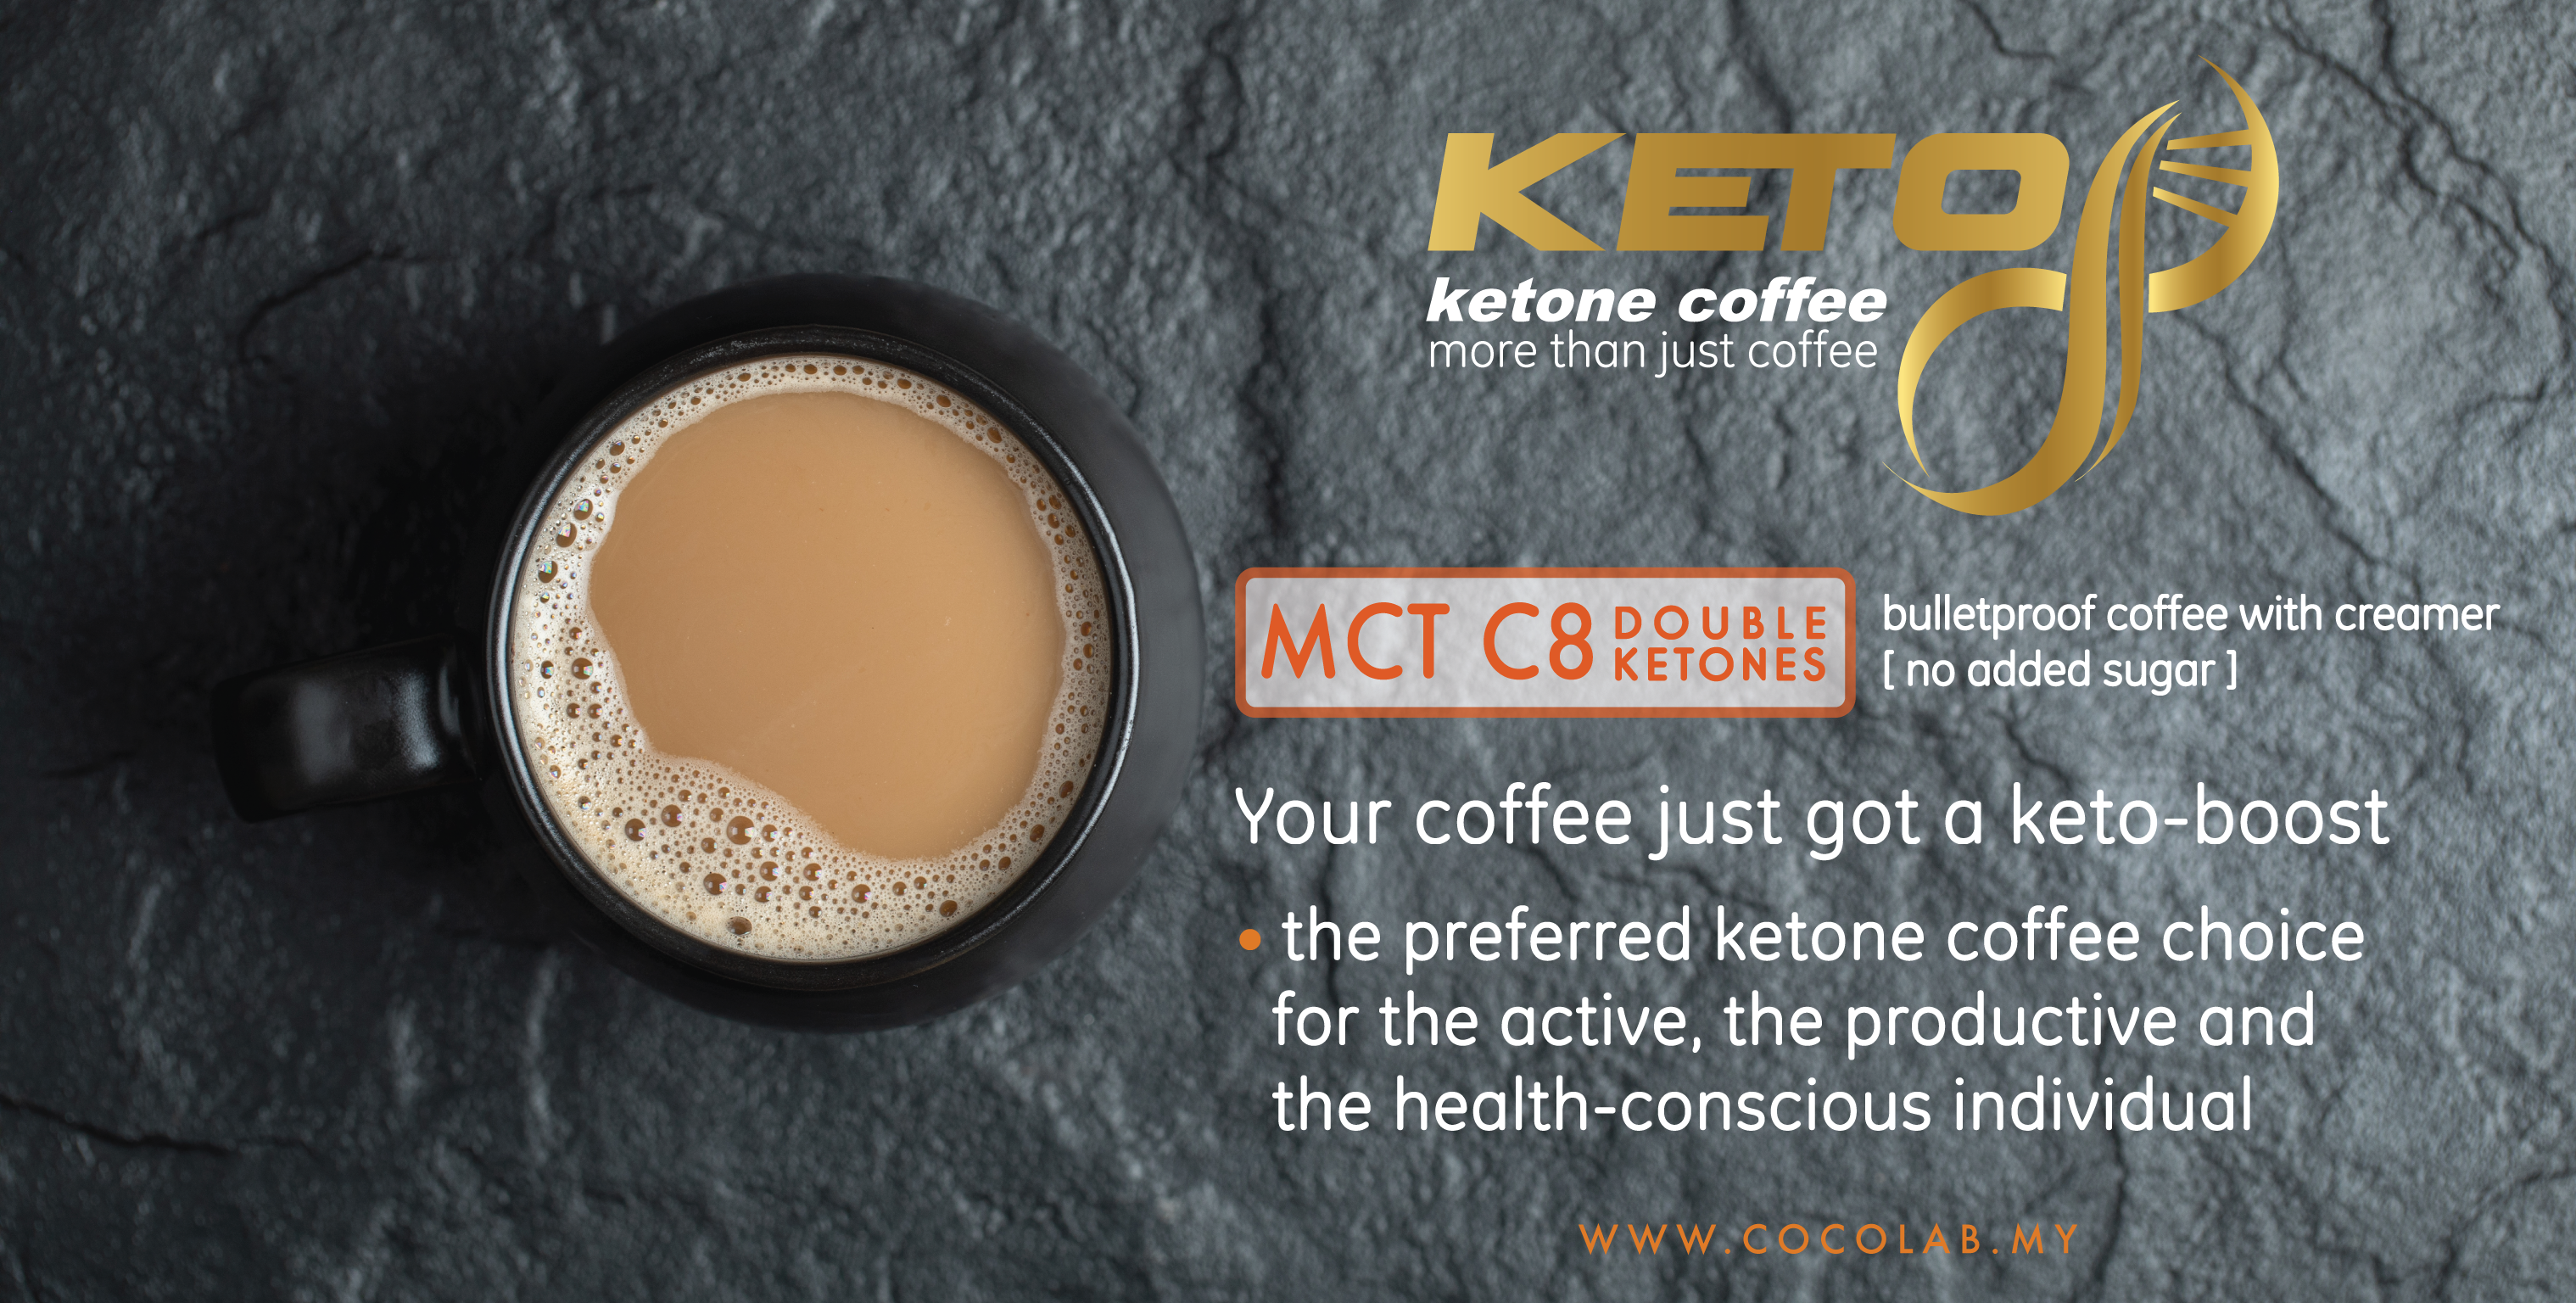 COCOLAB Keto8 Coffee bulletproof coffee for the active and health conscious